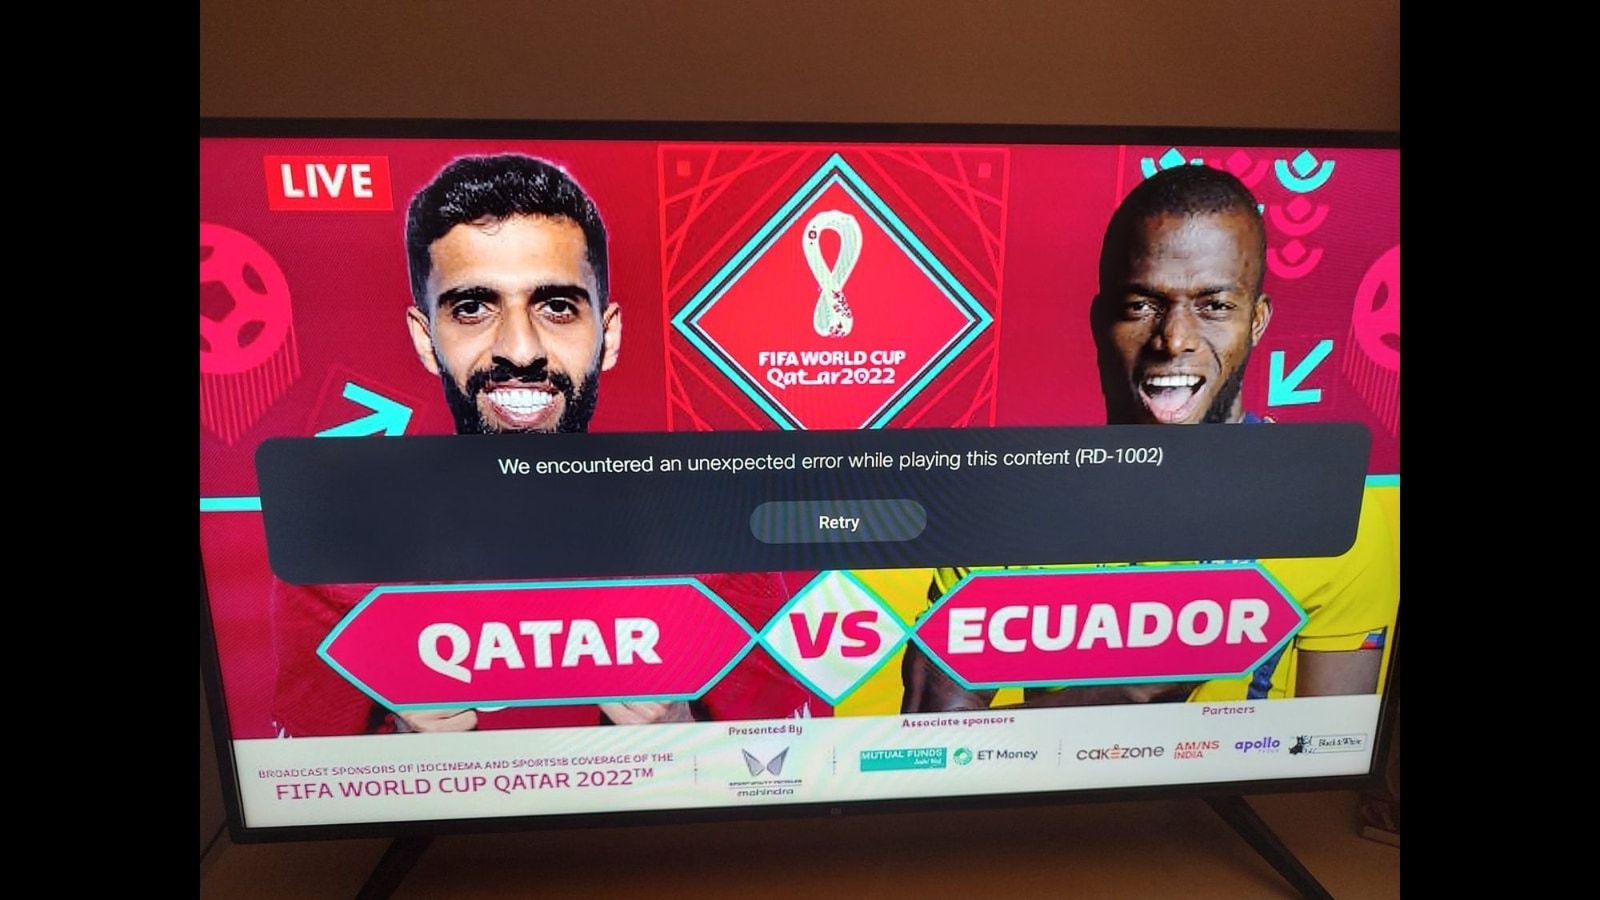 JioCinema trends on Twitter as fans face glitches while streaming football event Trending